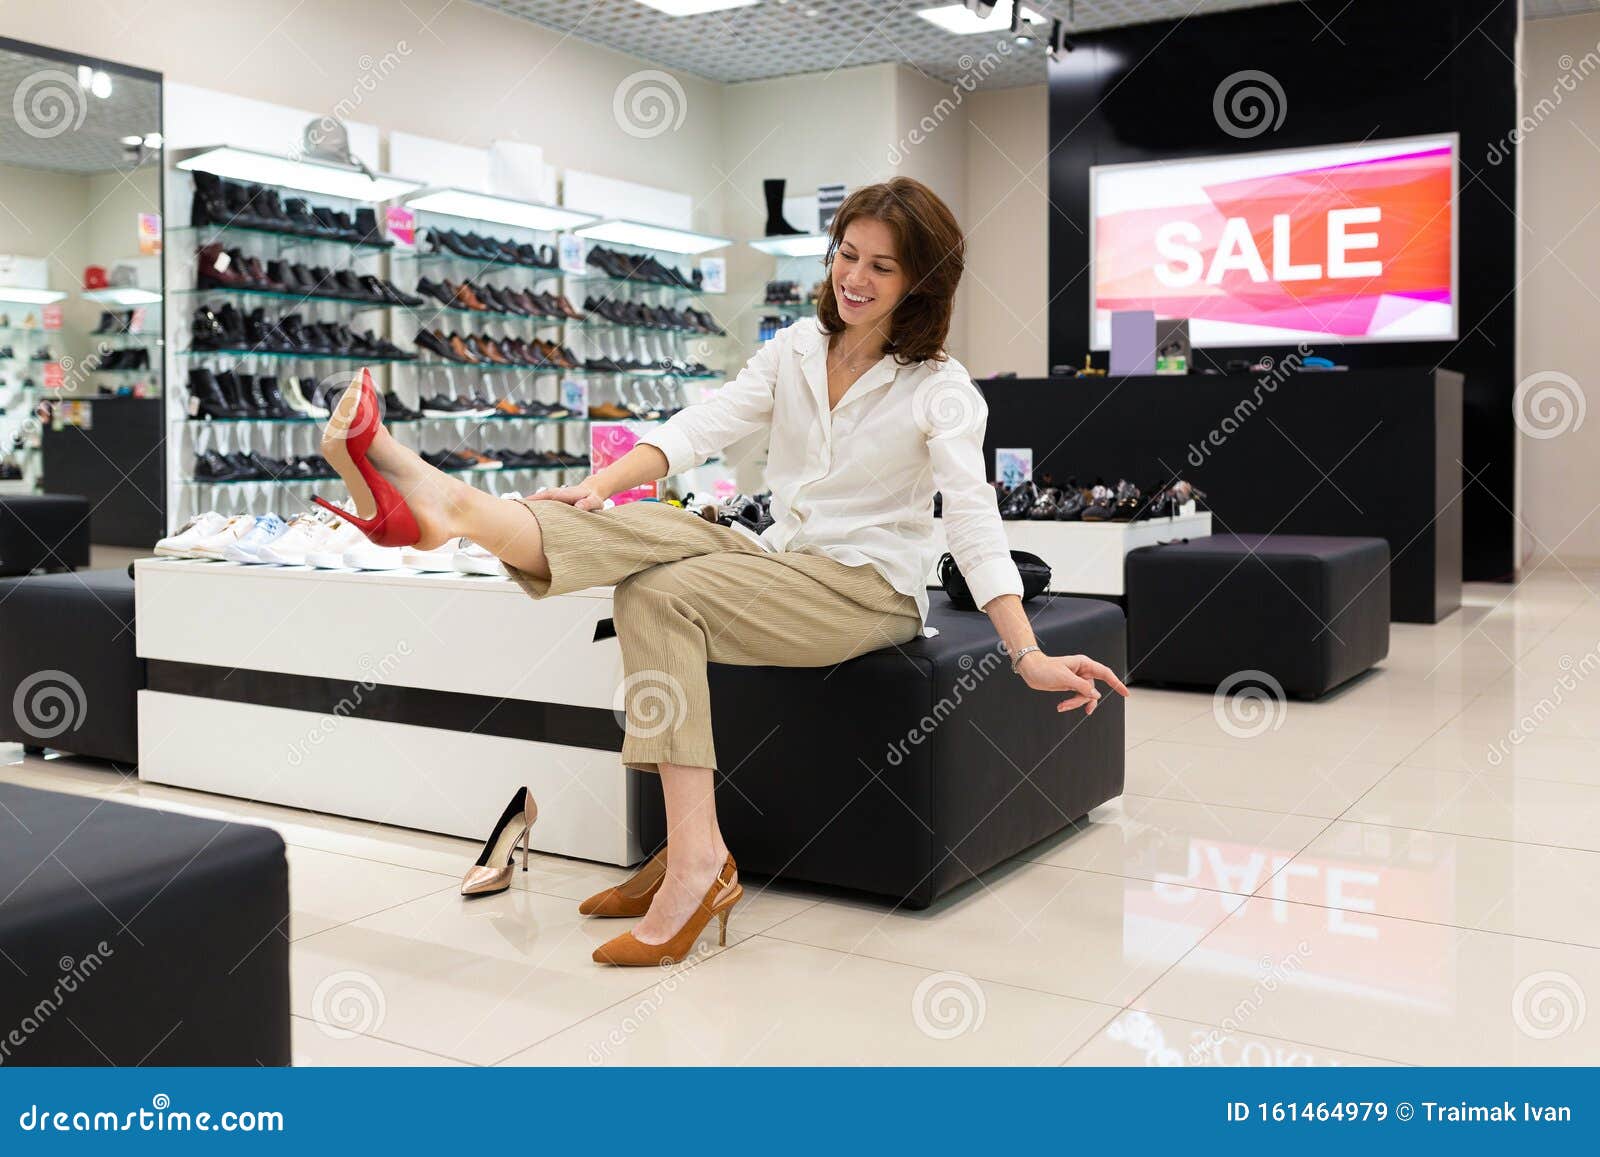 Happy Female Looks at Her New Red Shoes on High Heels. Stock Image ...